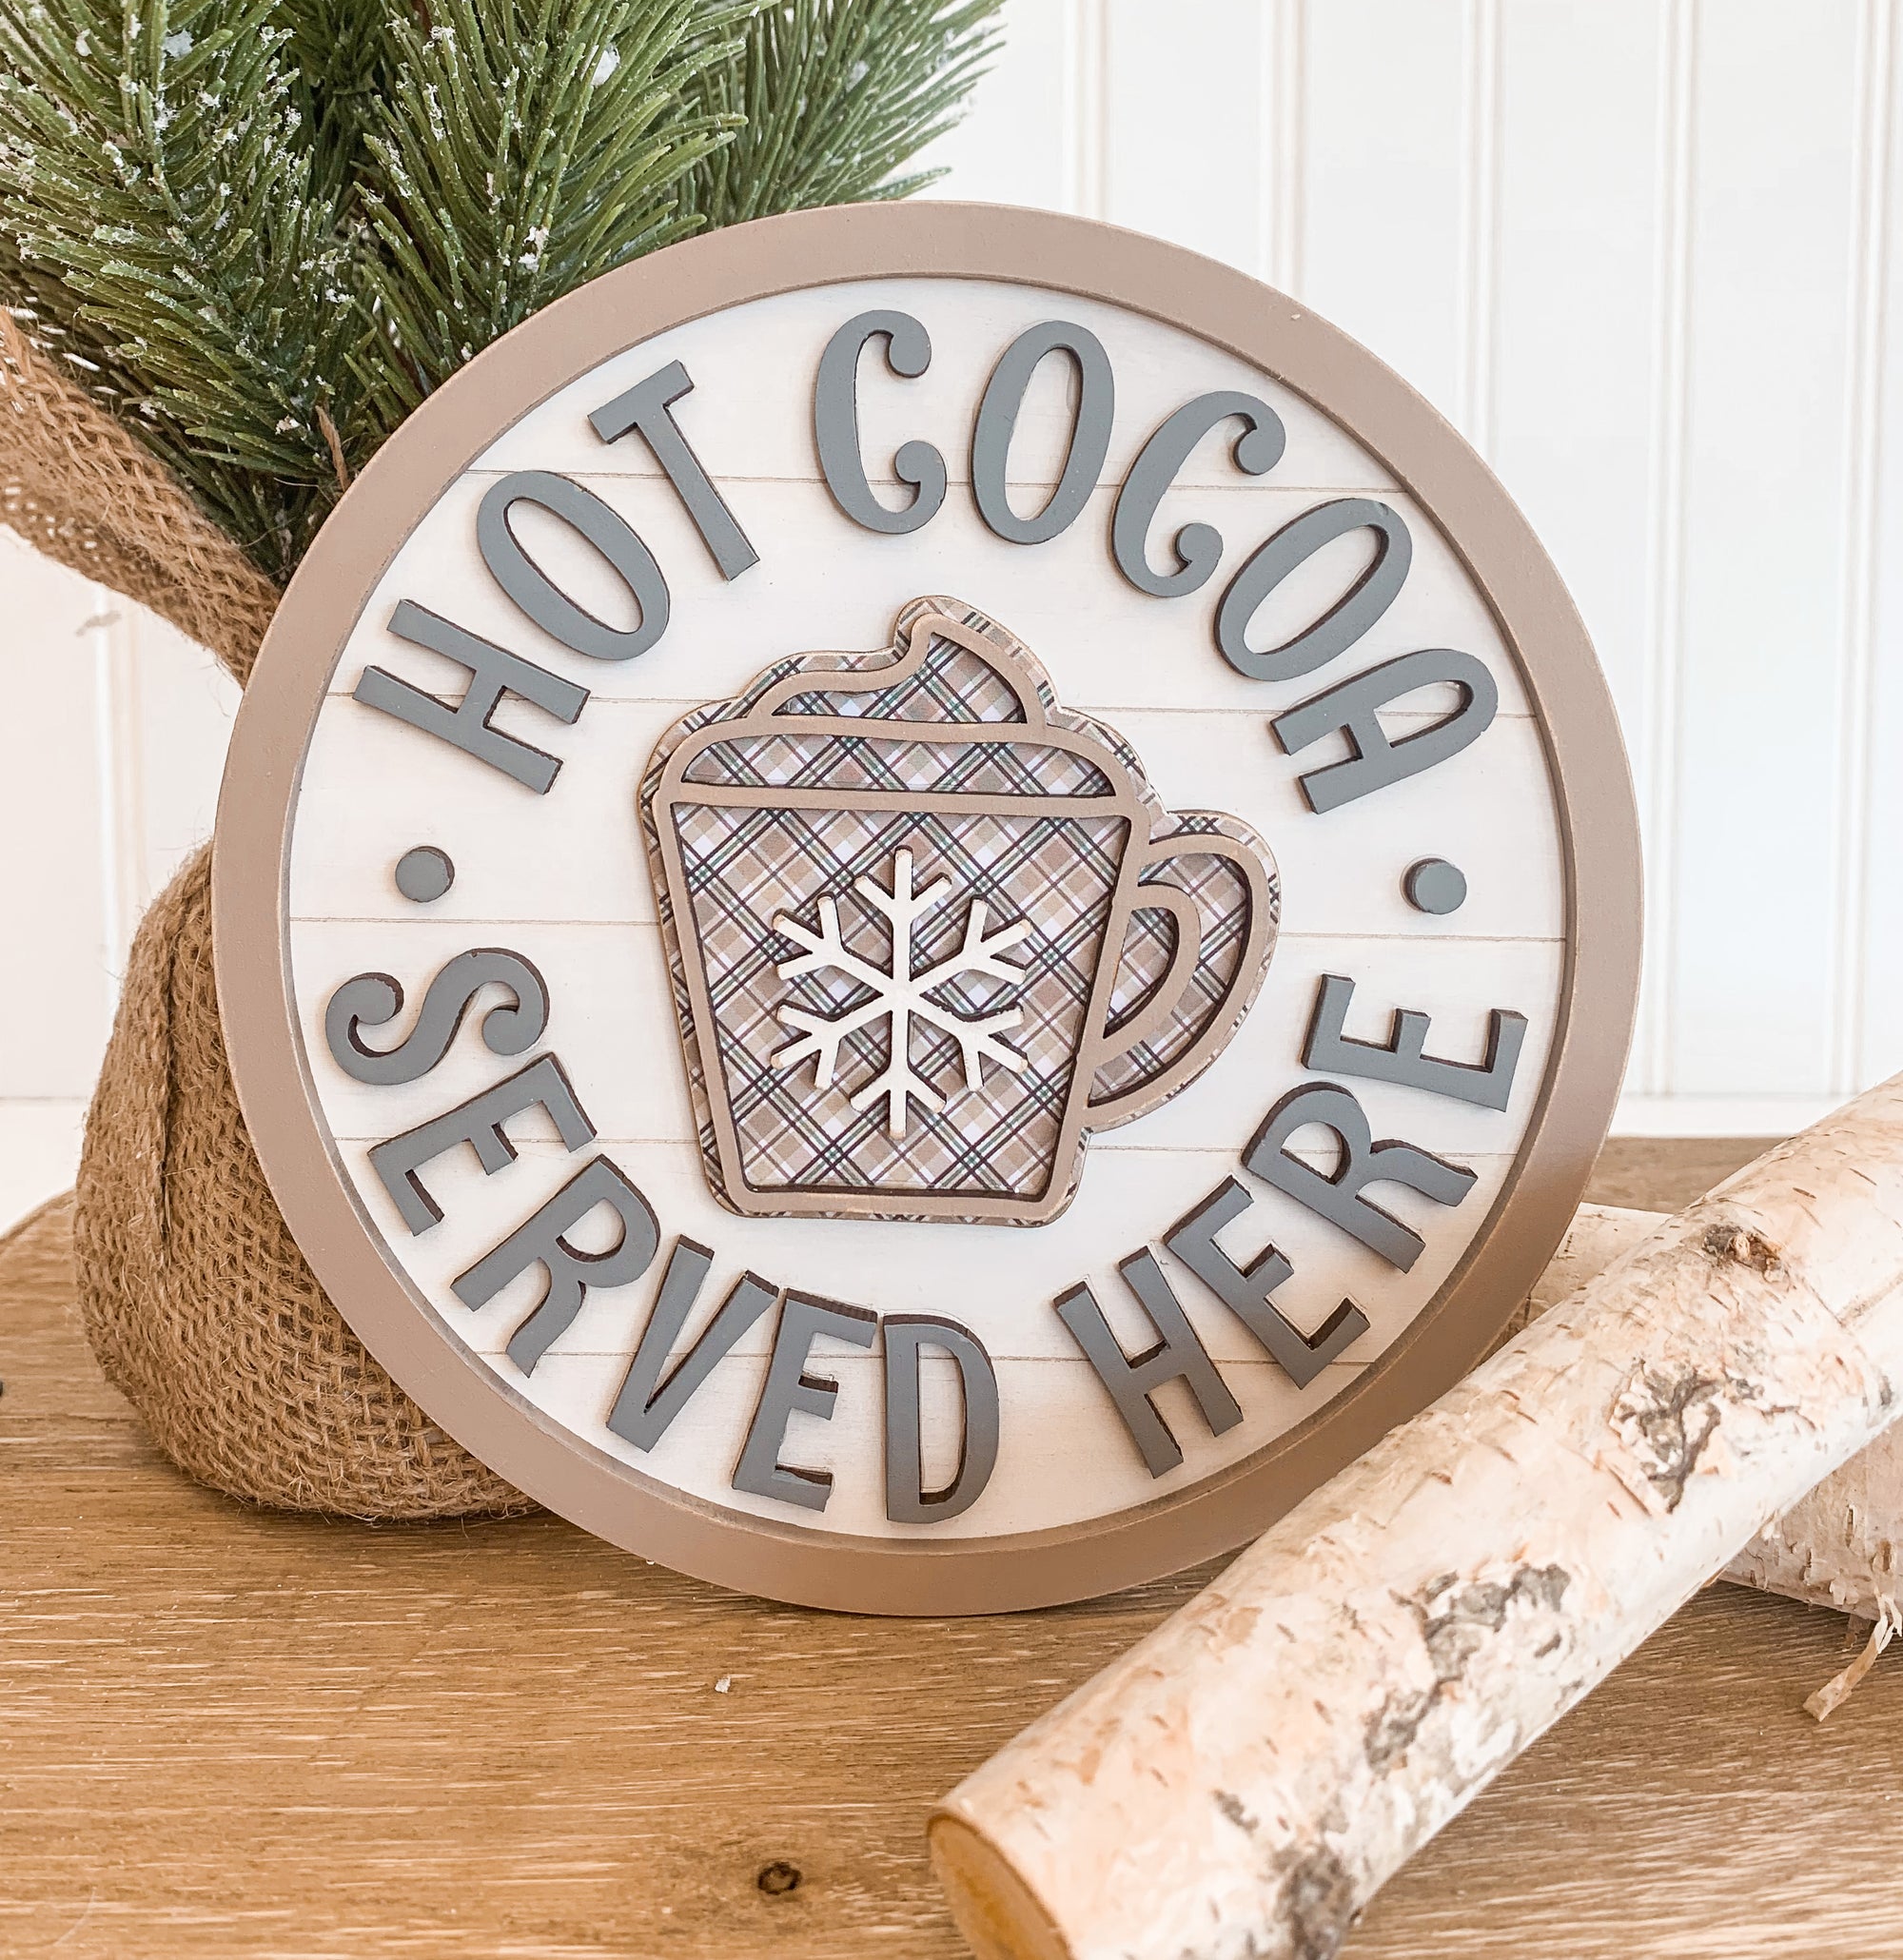 Hot cocoa wood shiplap sign, winter sign for tiered tray decor, winter themed tiered tray, hot cocoa served here sign, small wood signs, winter farmhouse decor, handmade winter decorations, wood craft kits